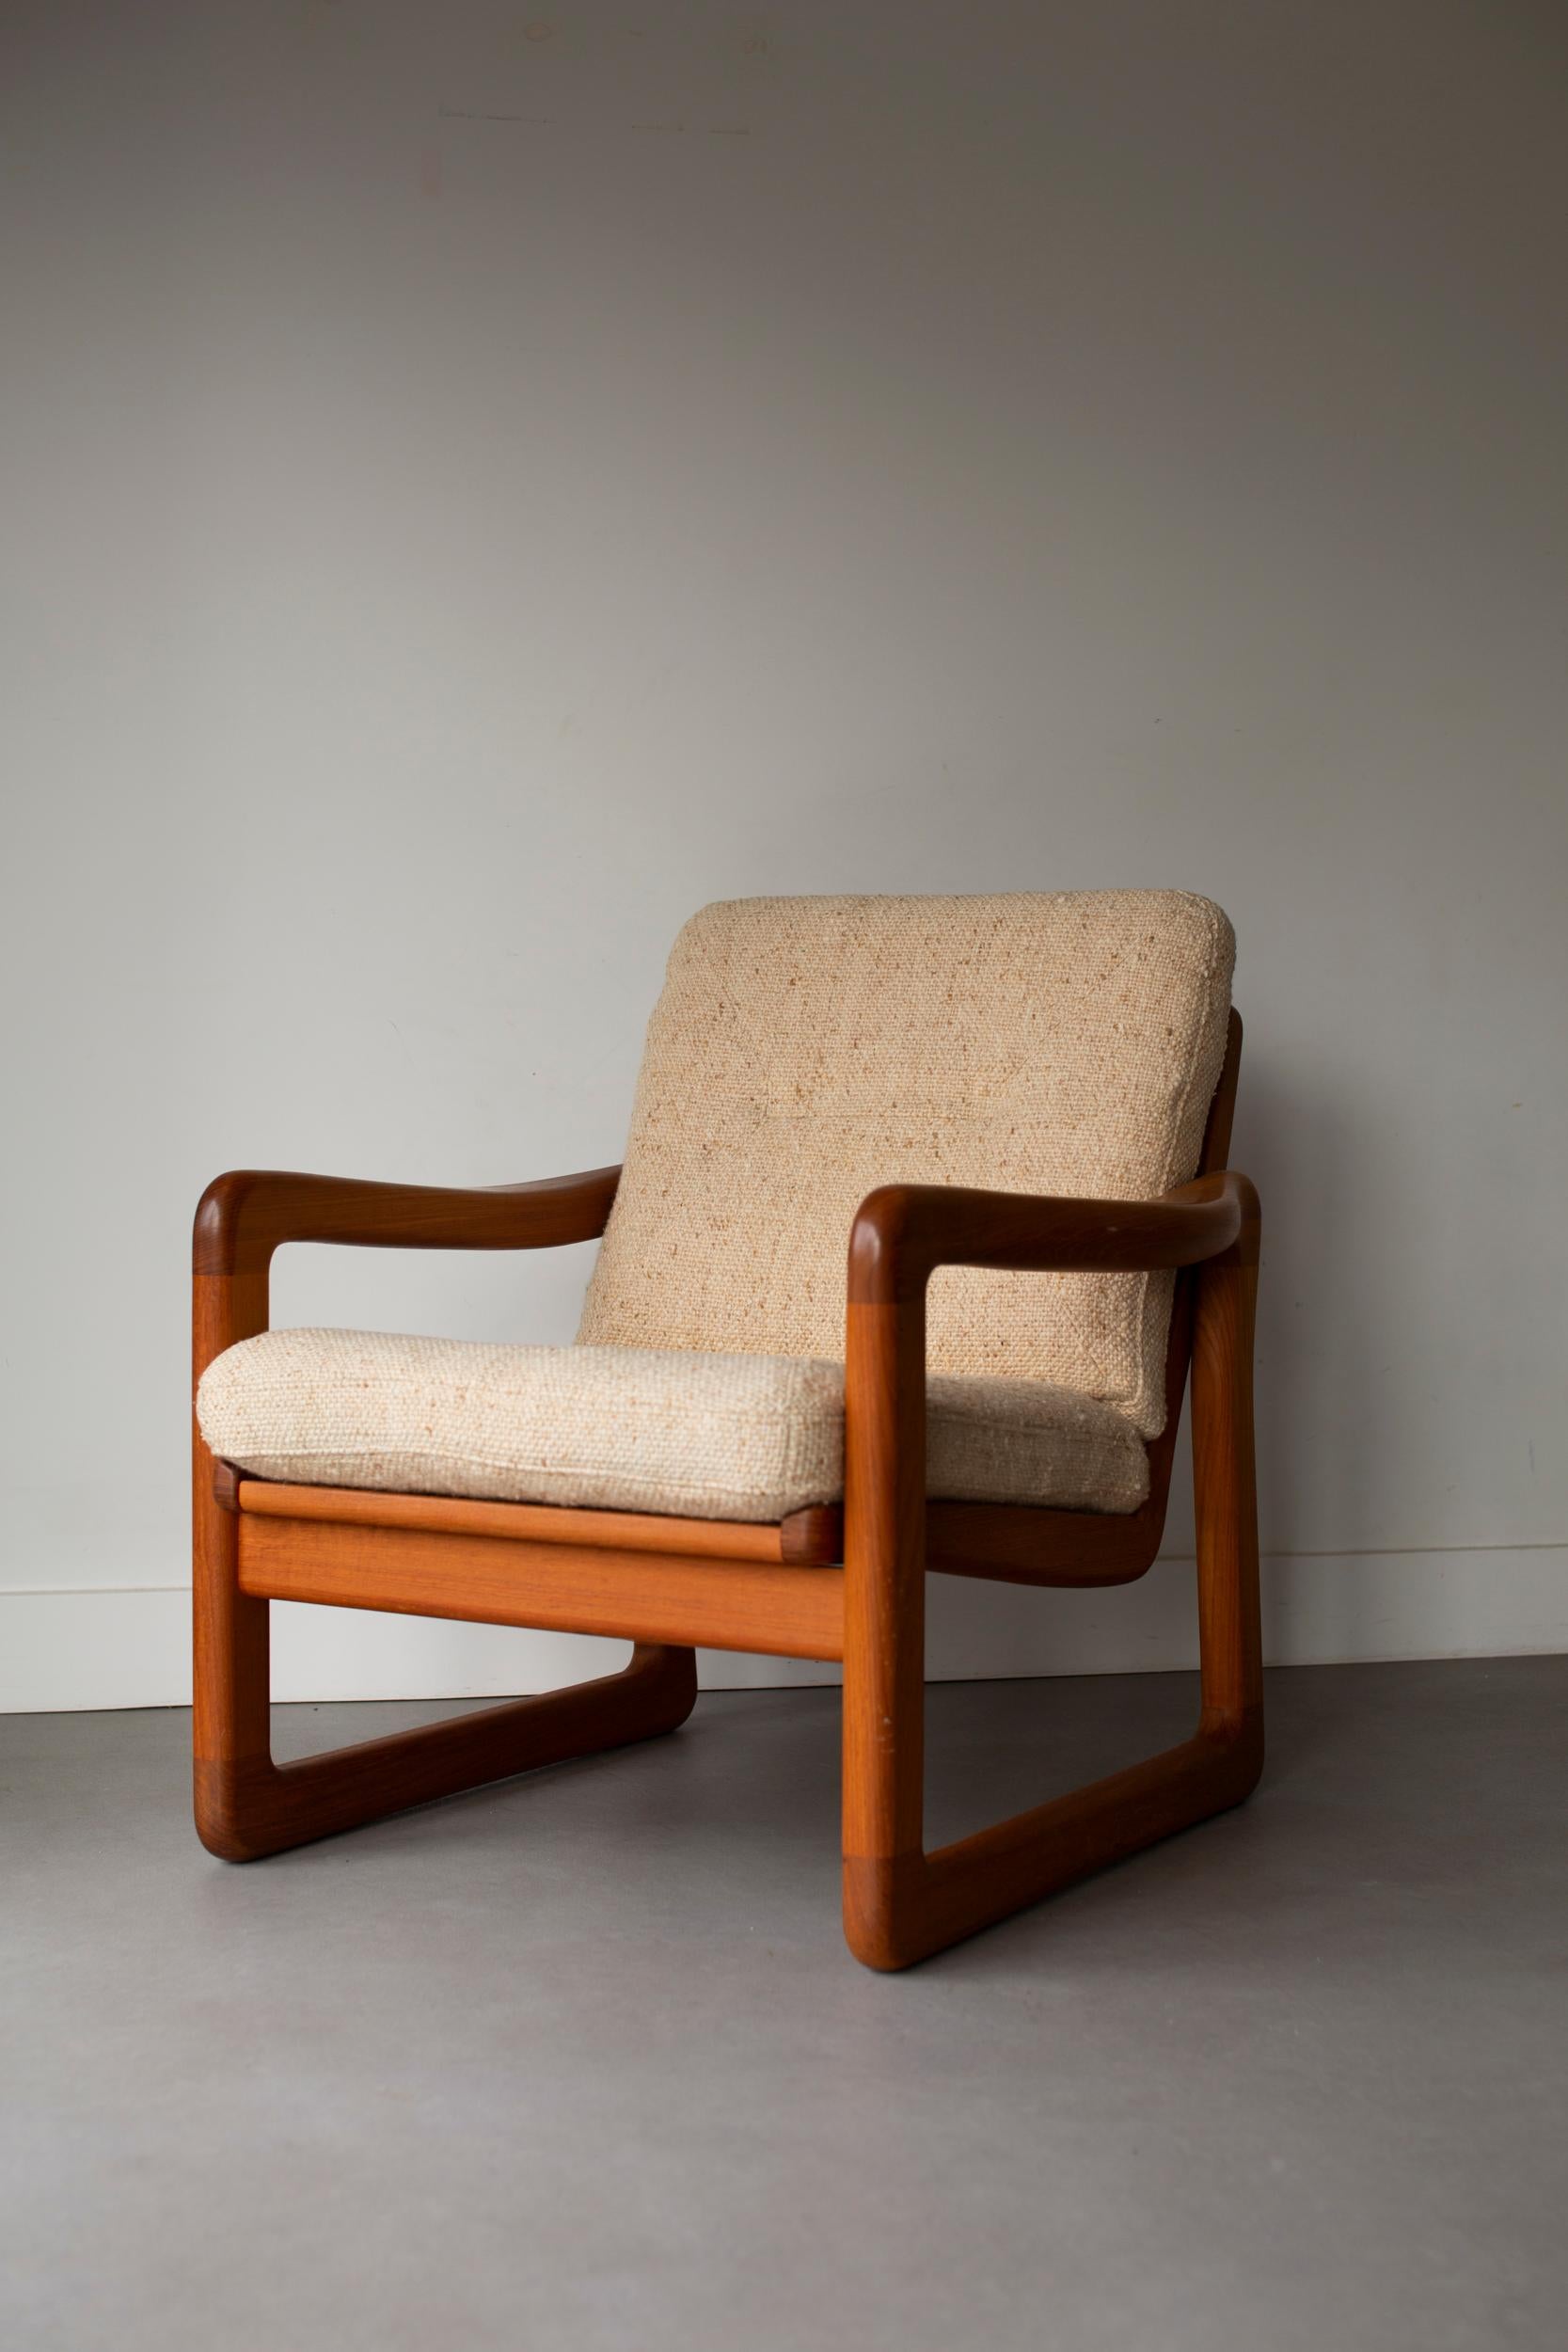 Expertly crafted in the iconic mid-century style, the Mid-century chair EMC Furniture 60's is the perfect addition to any modern home. Its sleek and timeless design brings a touch of elegance and sophistication to any room. Made with high-quality